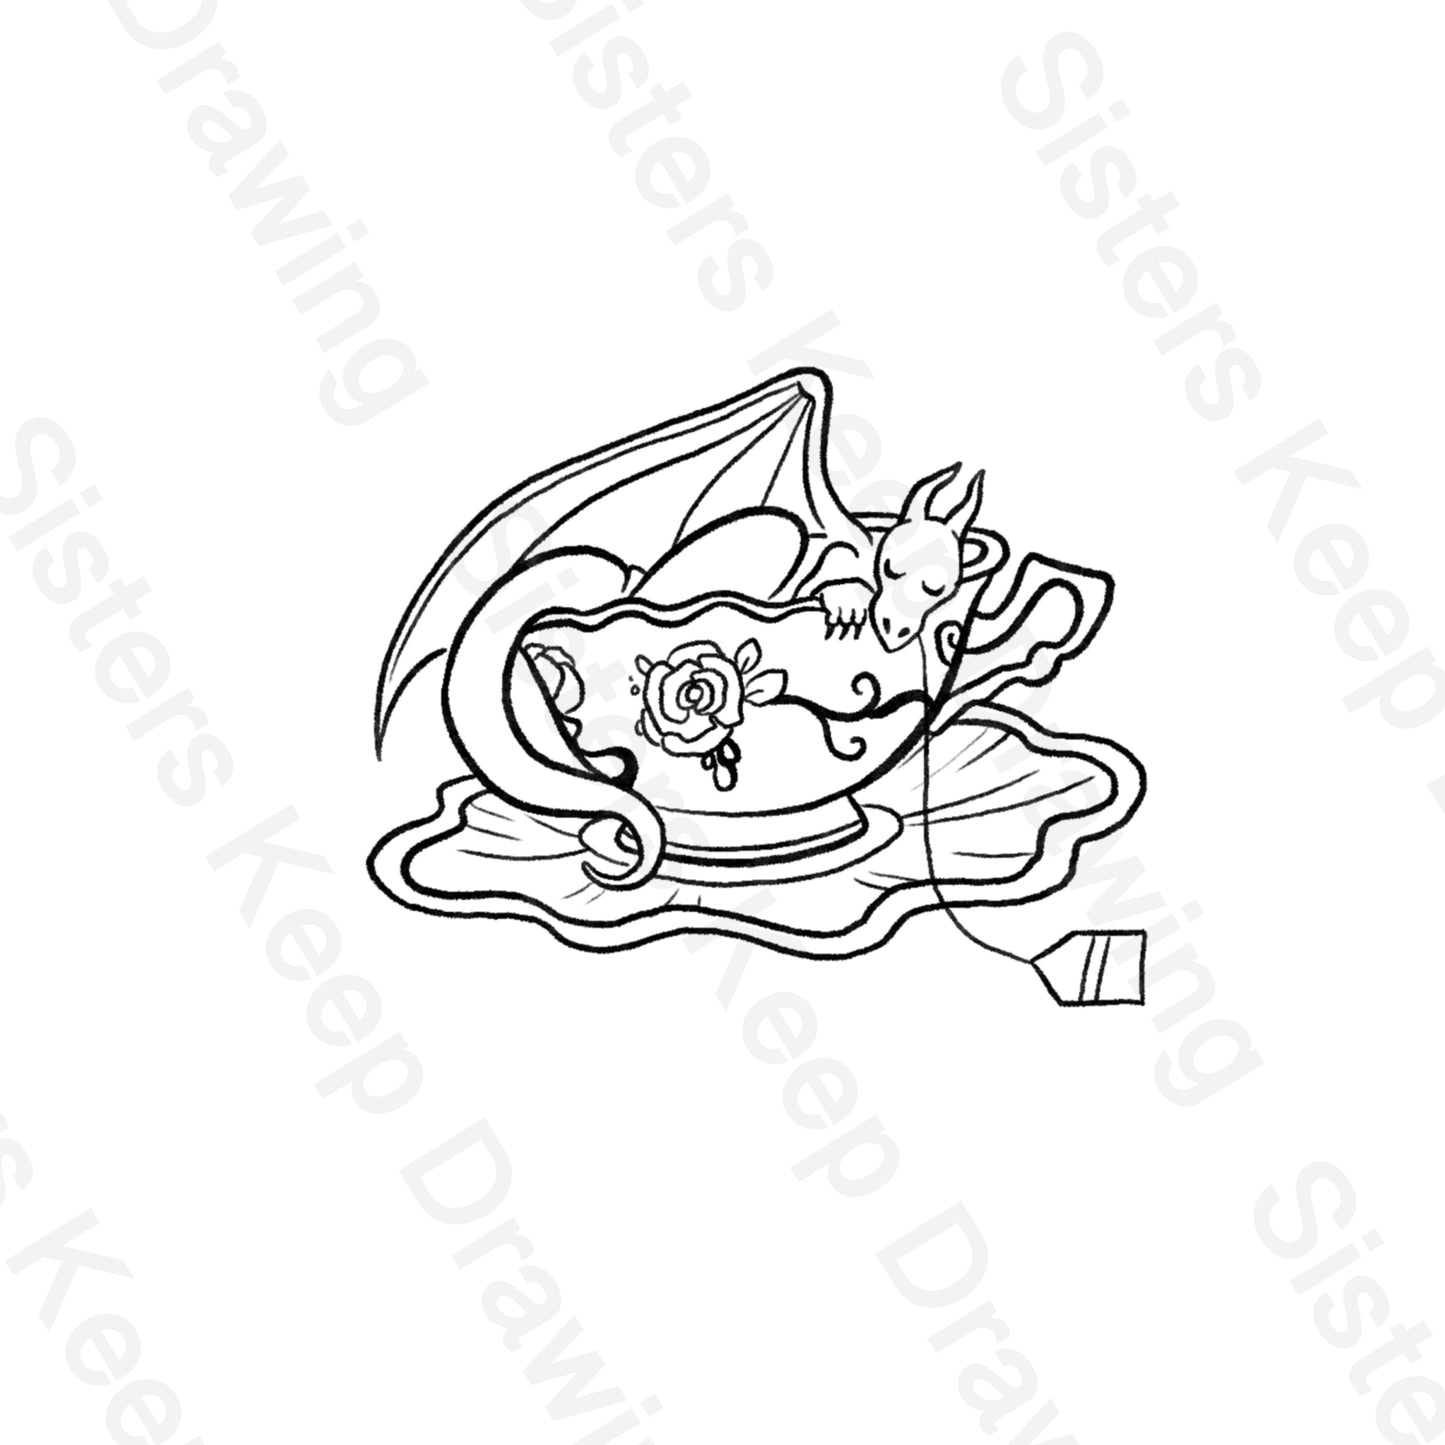 Tiny Dragon sleeping in a teacup -Tattoo Transparent Permission PNG- instant download digital printable artw